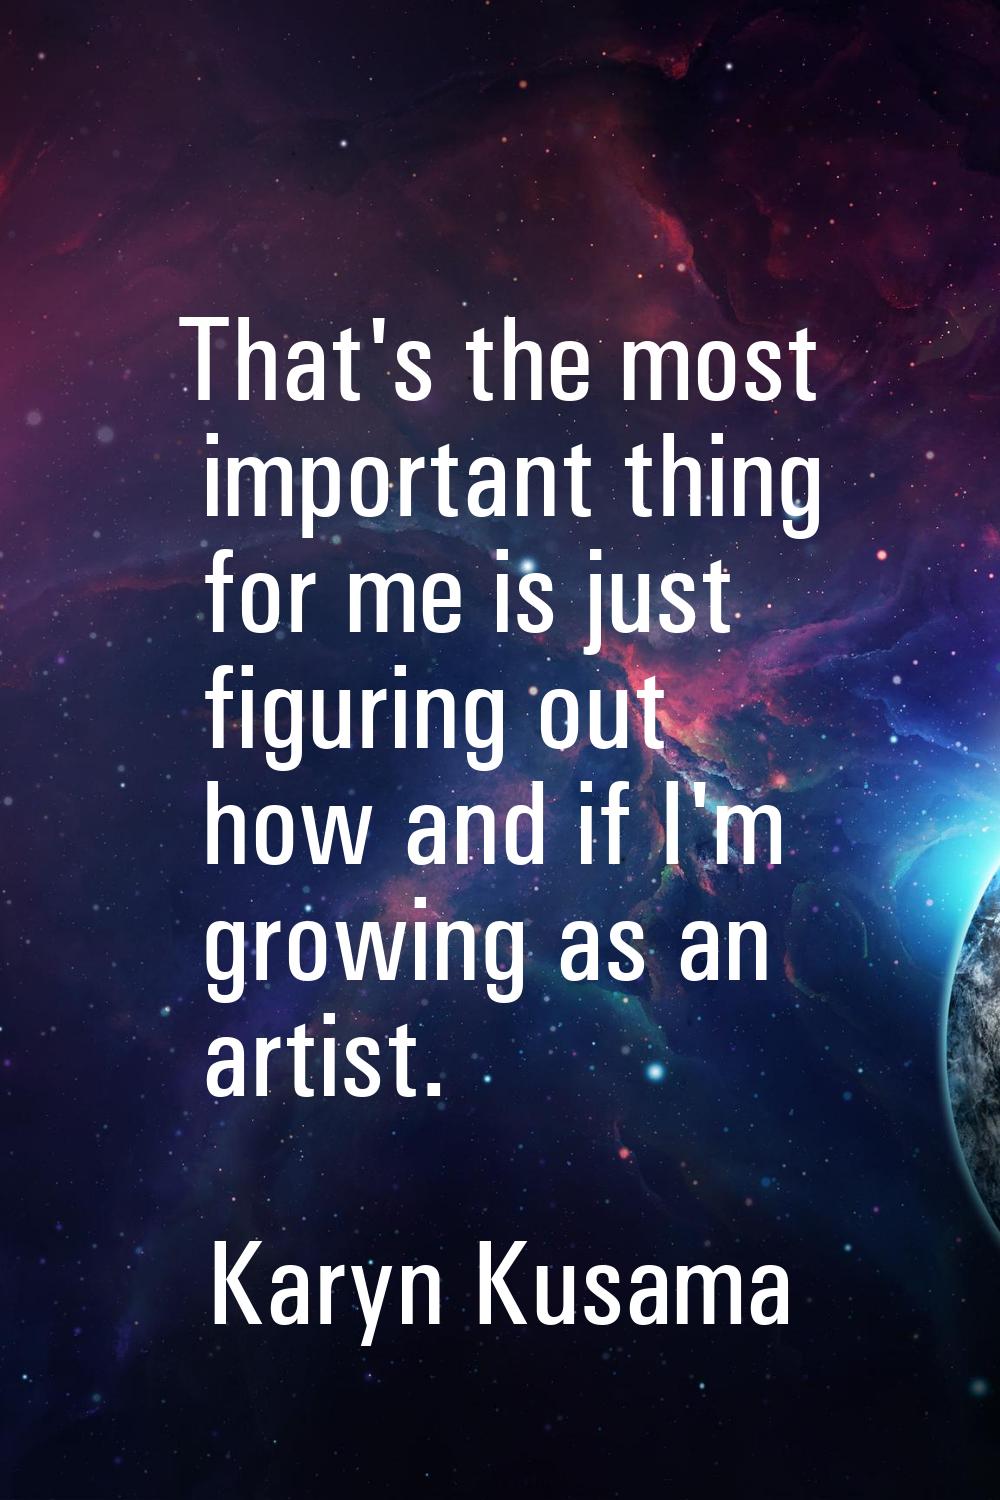 That's the most important thing for me is just figuring out how and if I'm growing as an artist.